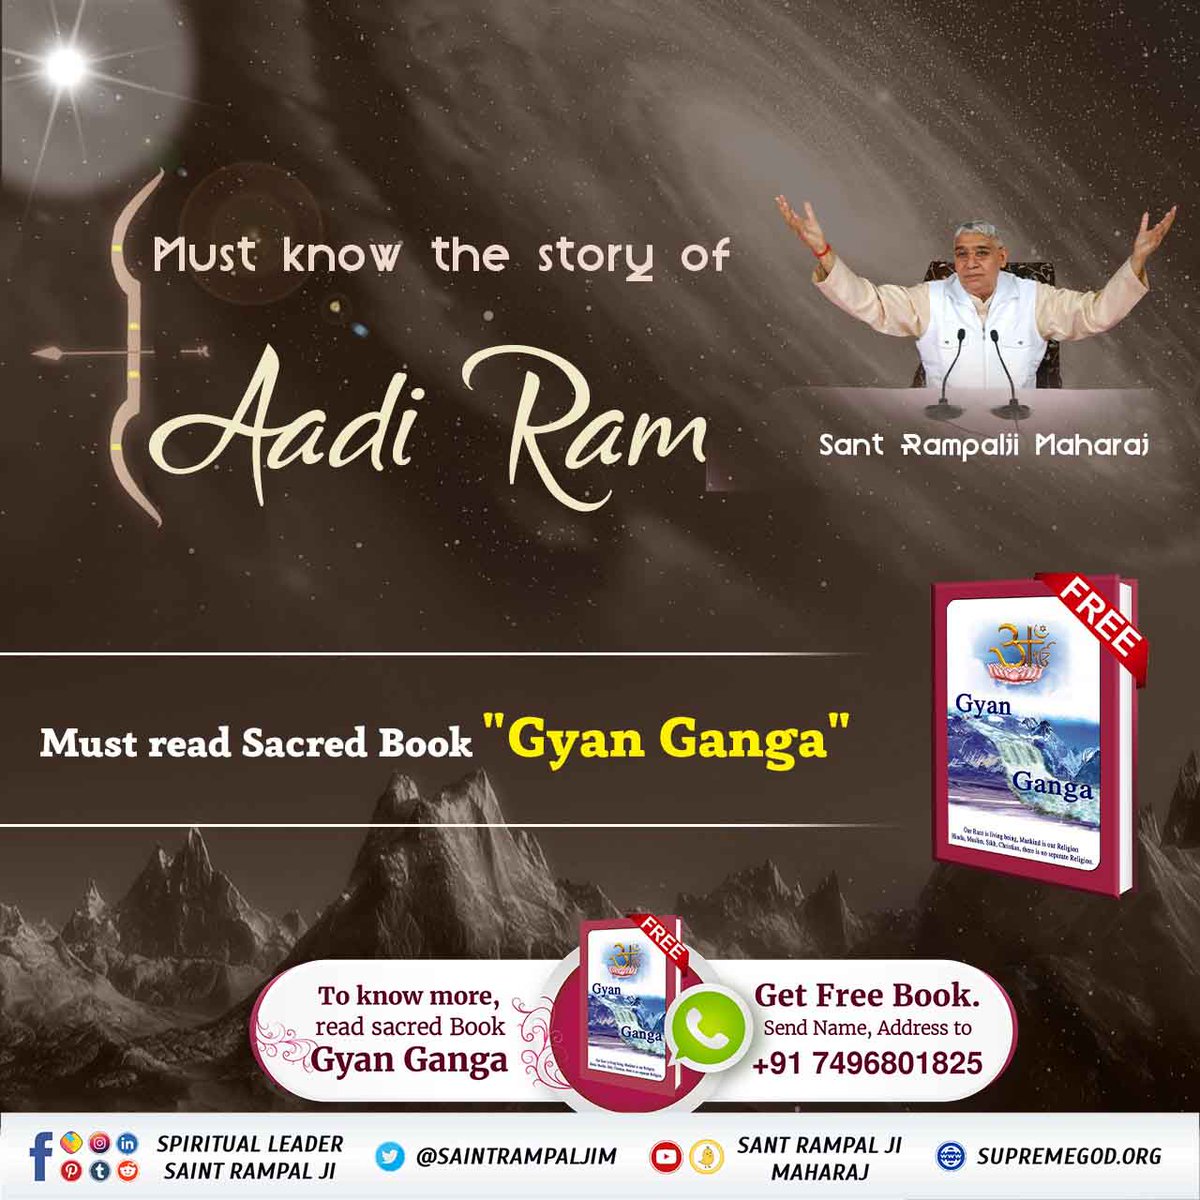 Kabir is God, He is the real Aadi Ram who can remove any deadly disease of his devotees. Yajurved Adhyay 8 Mantra 13- God even destroys the most heinous sins. It is Almighty Kabir forgives the sins of His worshipper. #Who_Is_AadiRam